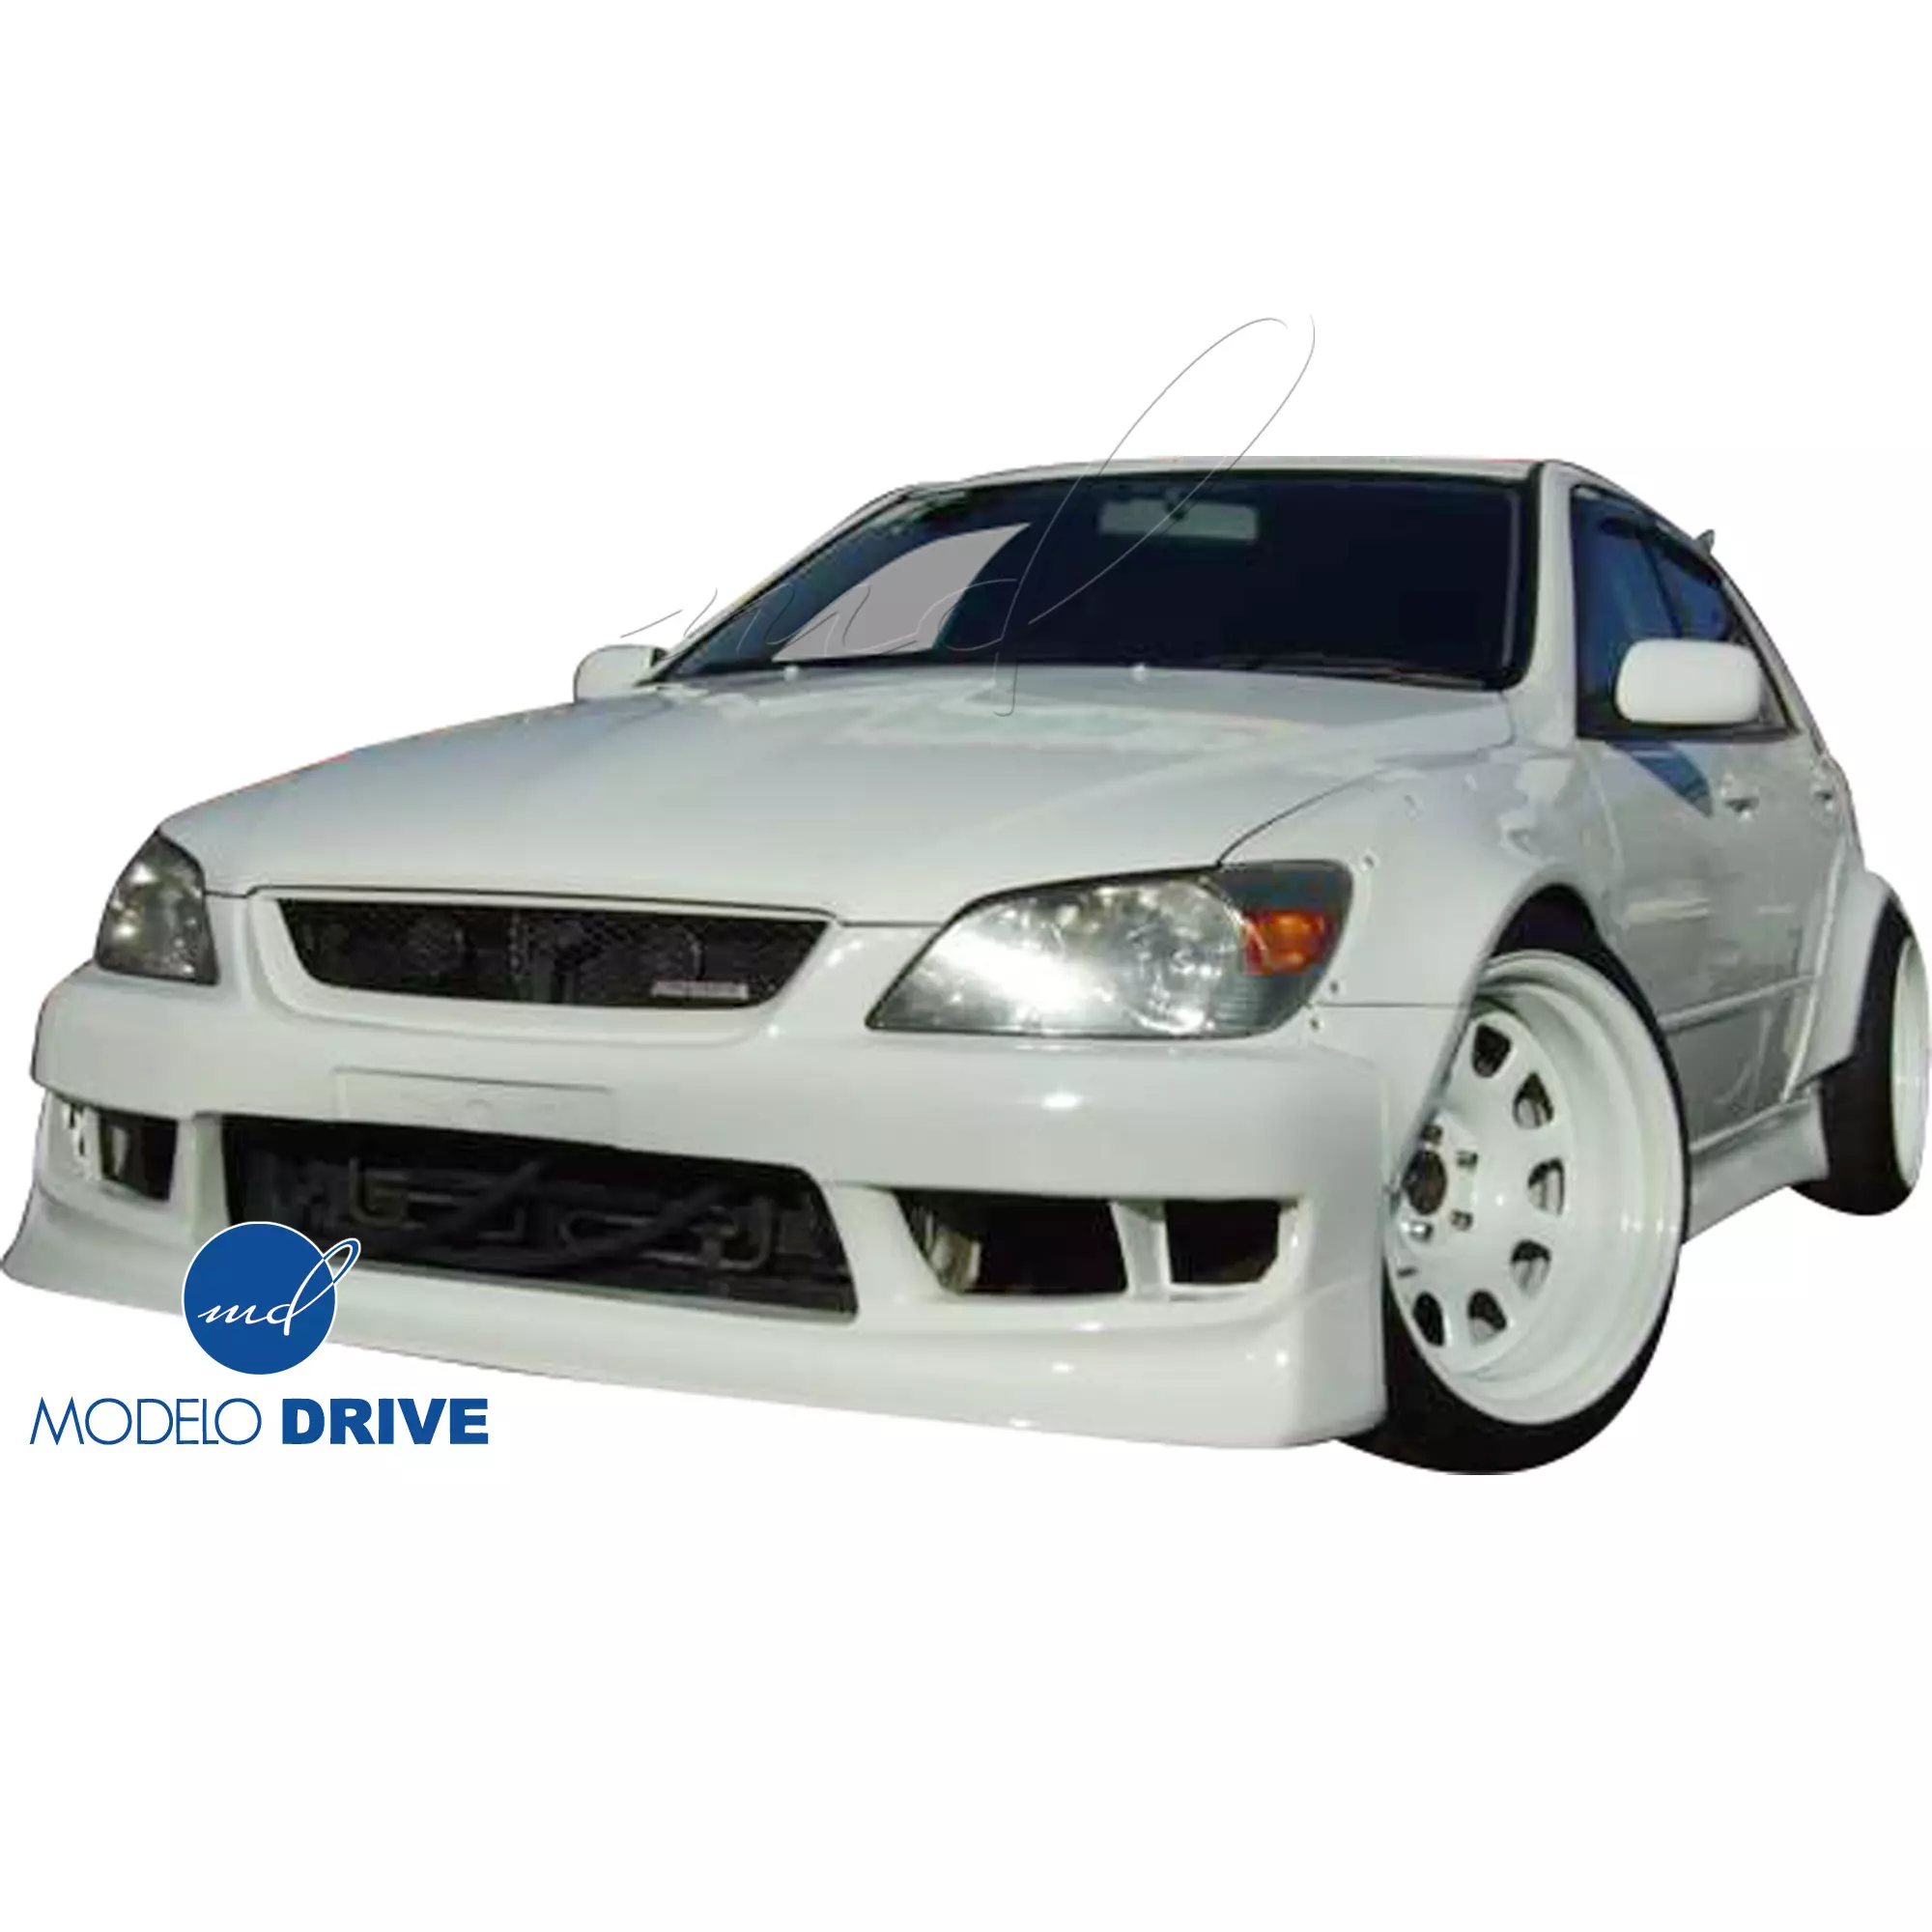 ModeloDrive FRP MSV Wide Body 30/65 Fender Flare Set 8pc > Lexus IS Series IS300 2000-2005> 4dr - Image 4